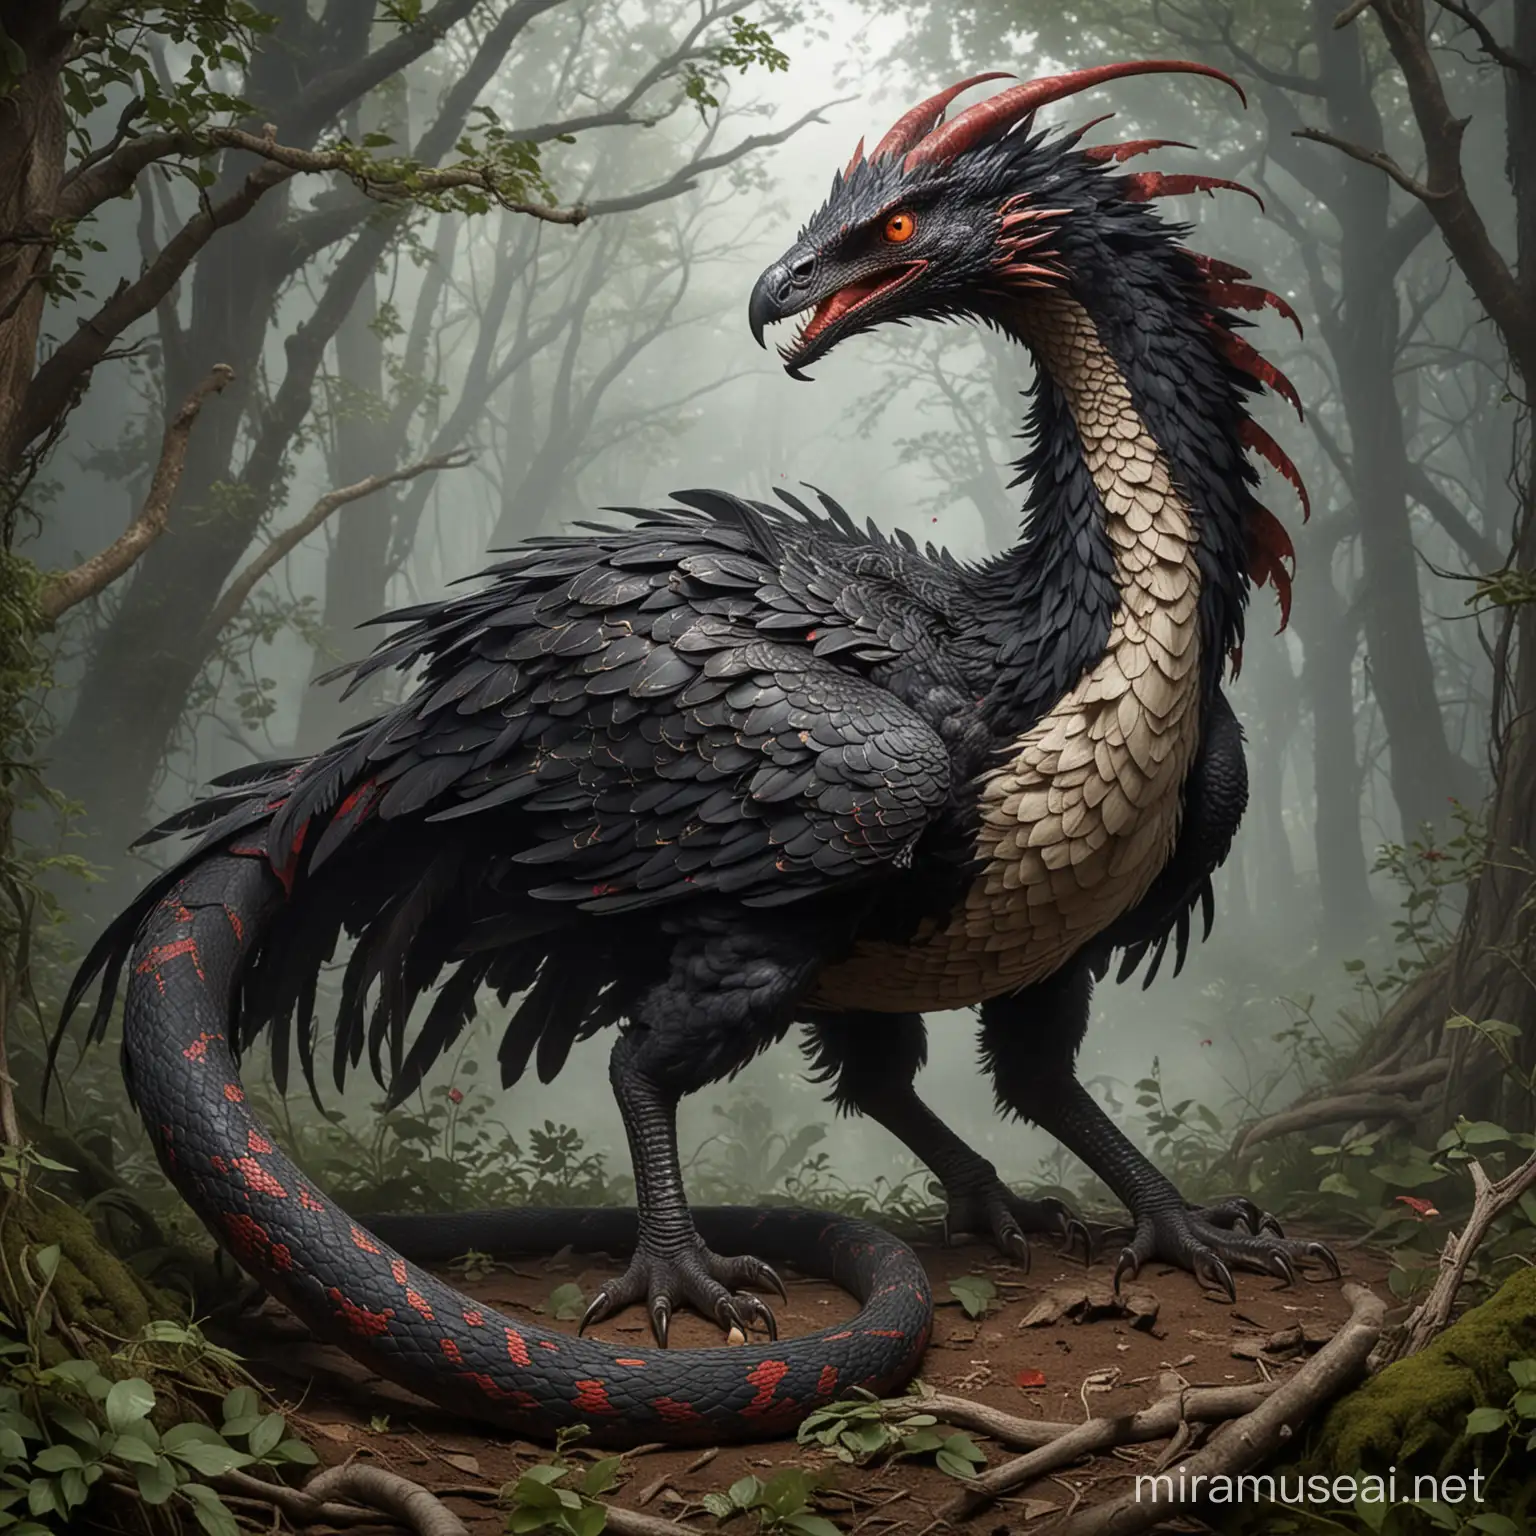 A full body, menacing mythical beast Cockatrice, with the tail of a snake, staring with bloodthirsty eyes in a nest